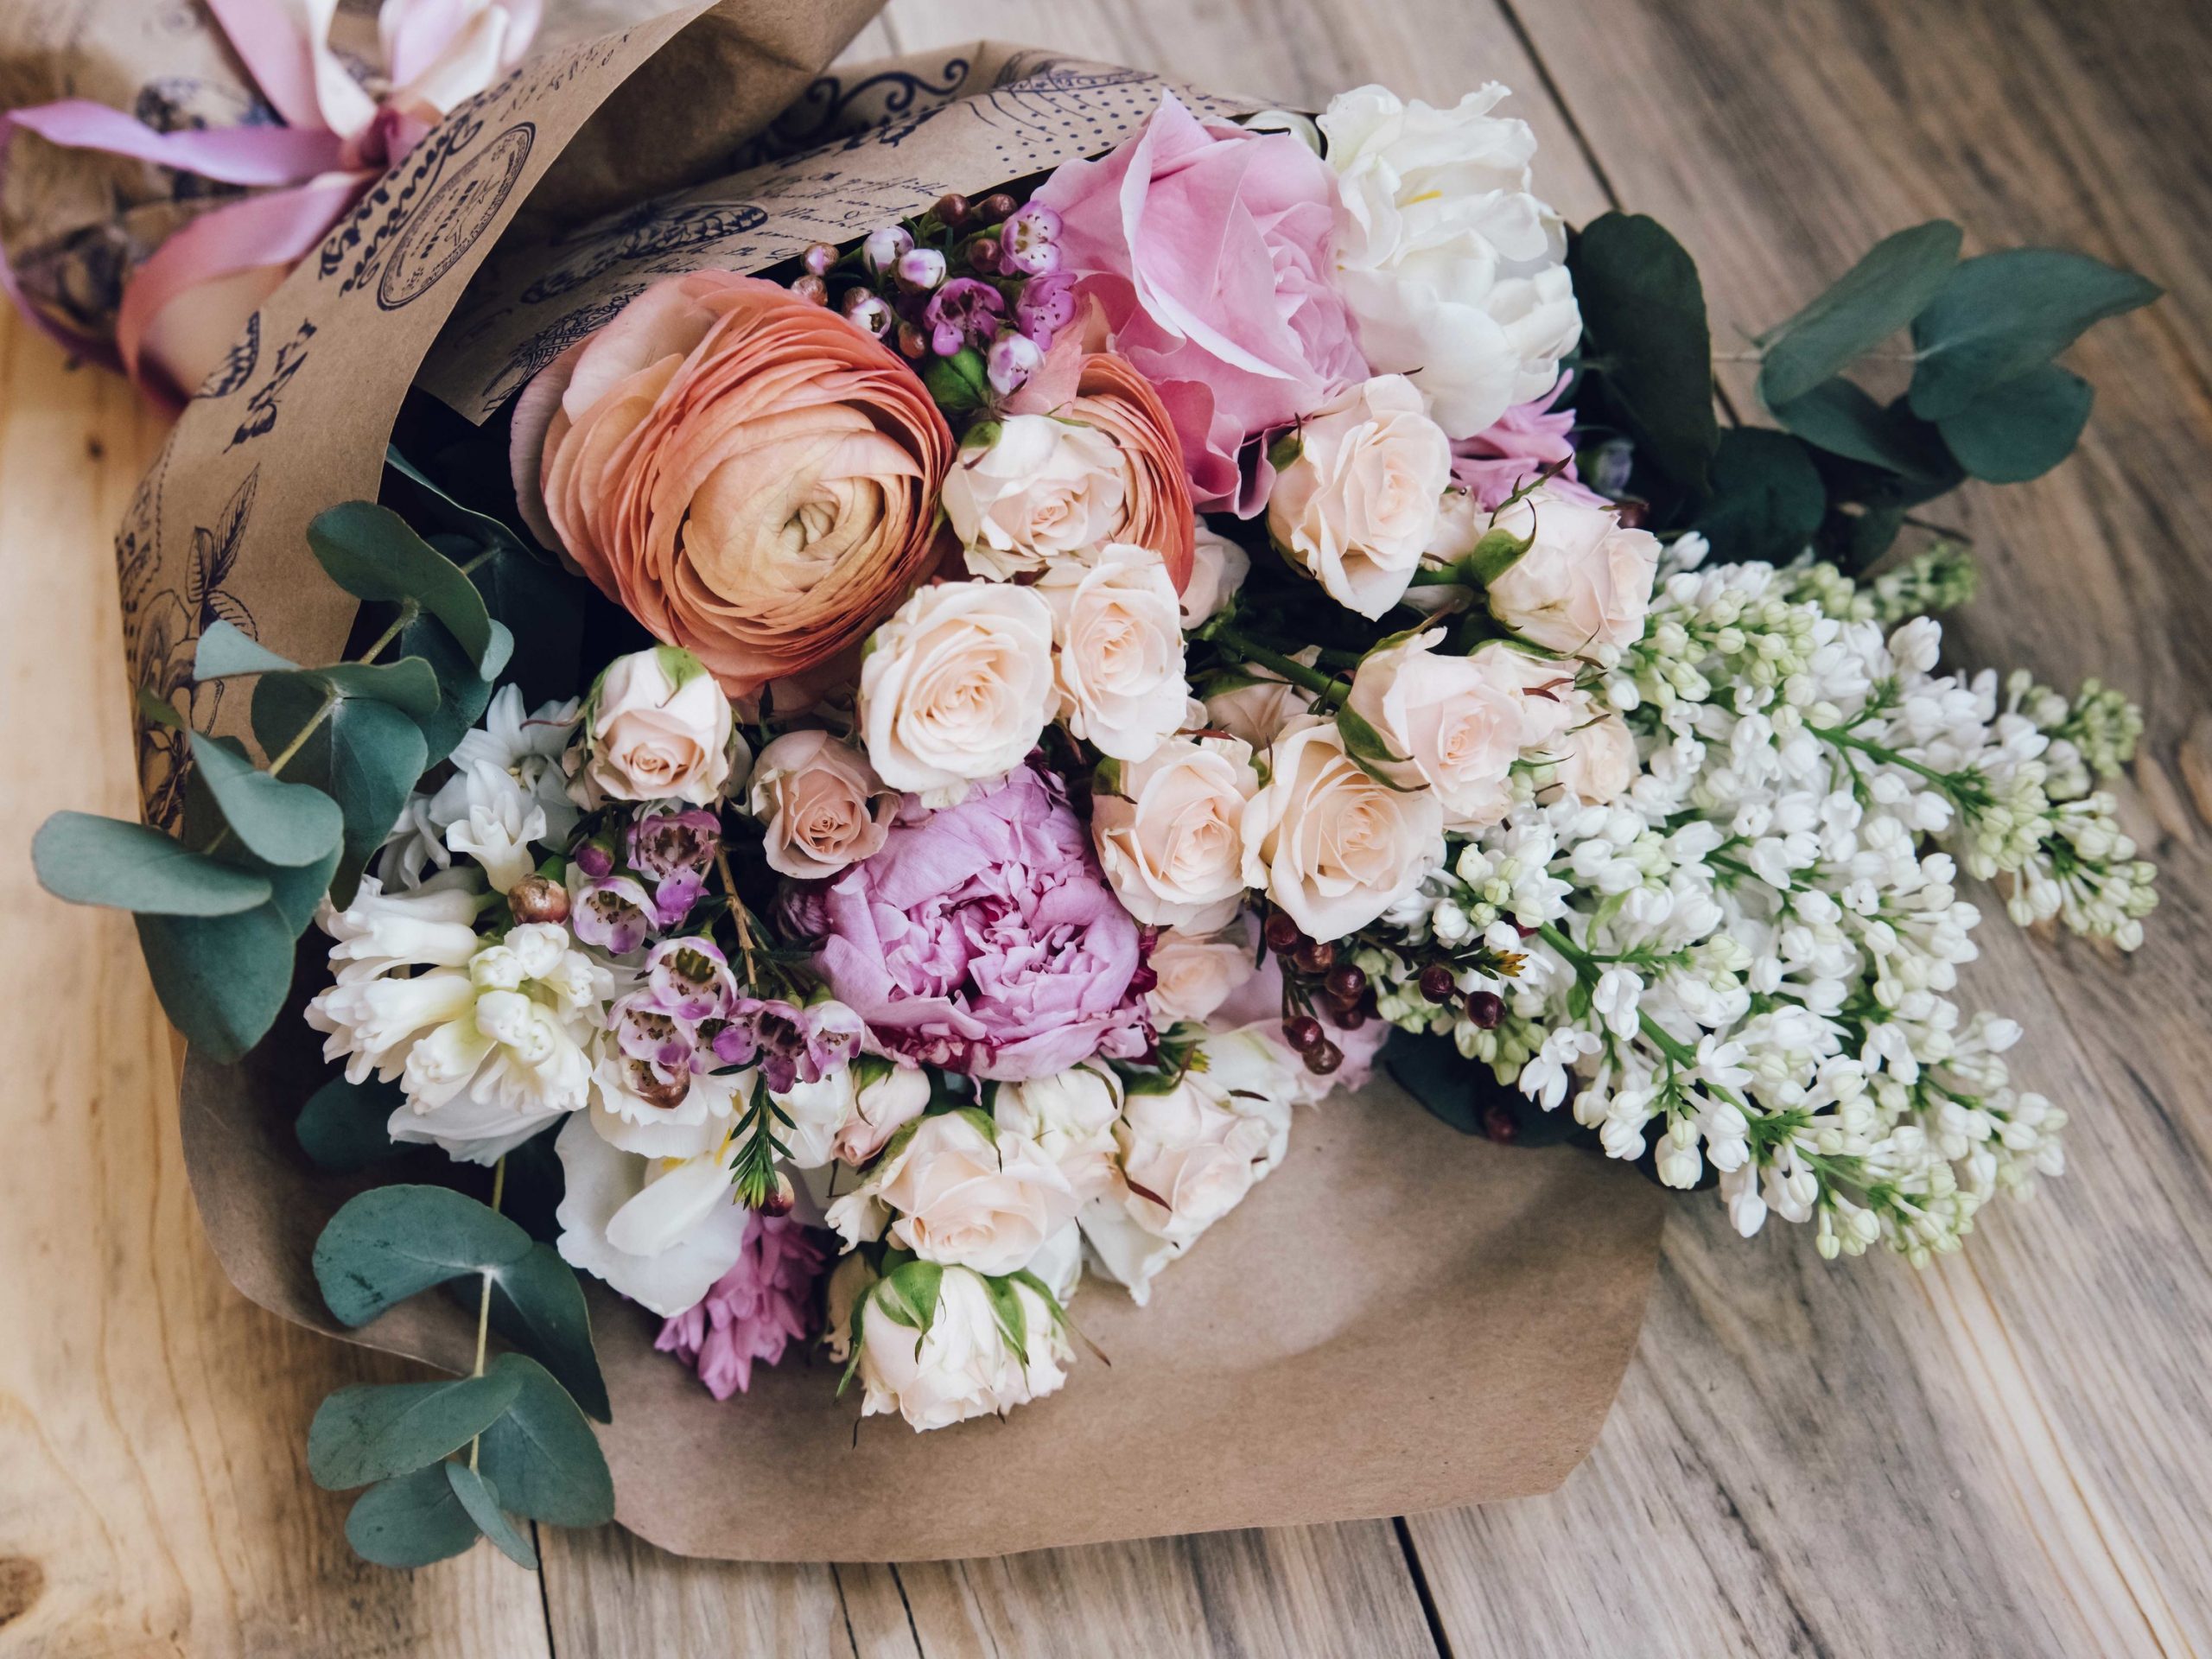 4 Hassle-Free Ways to Keep Your Cut Flowers Fresh - Coming Soon in UAE